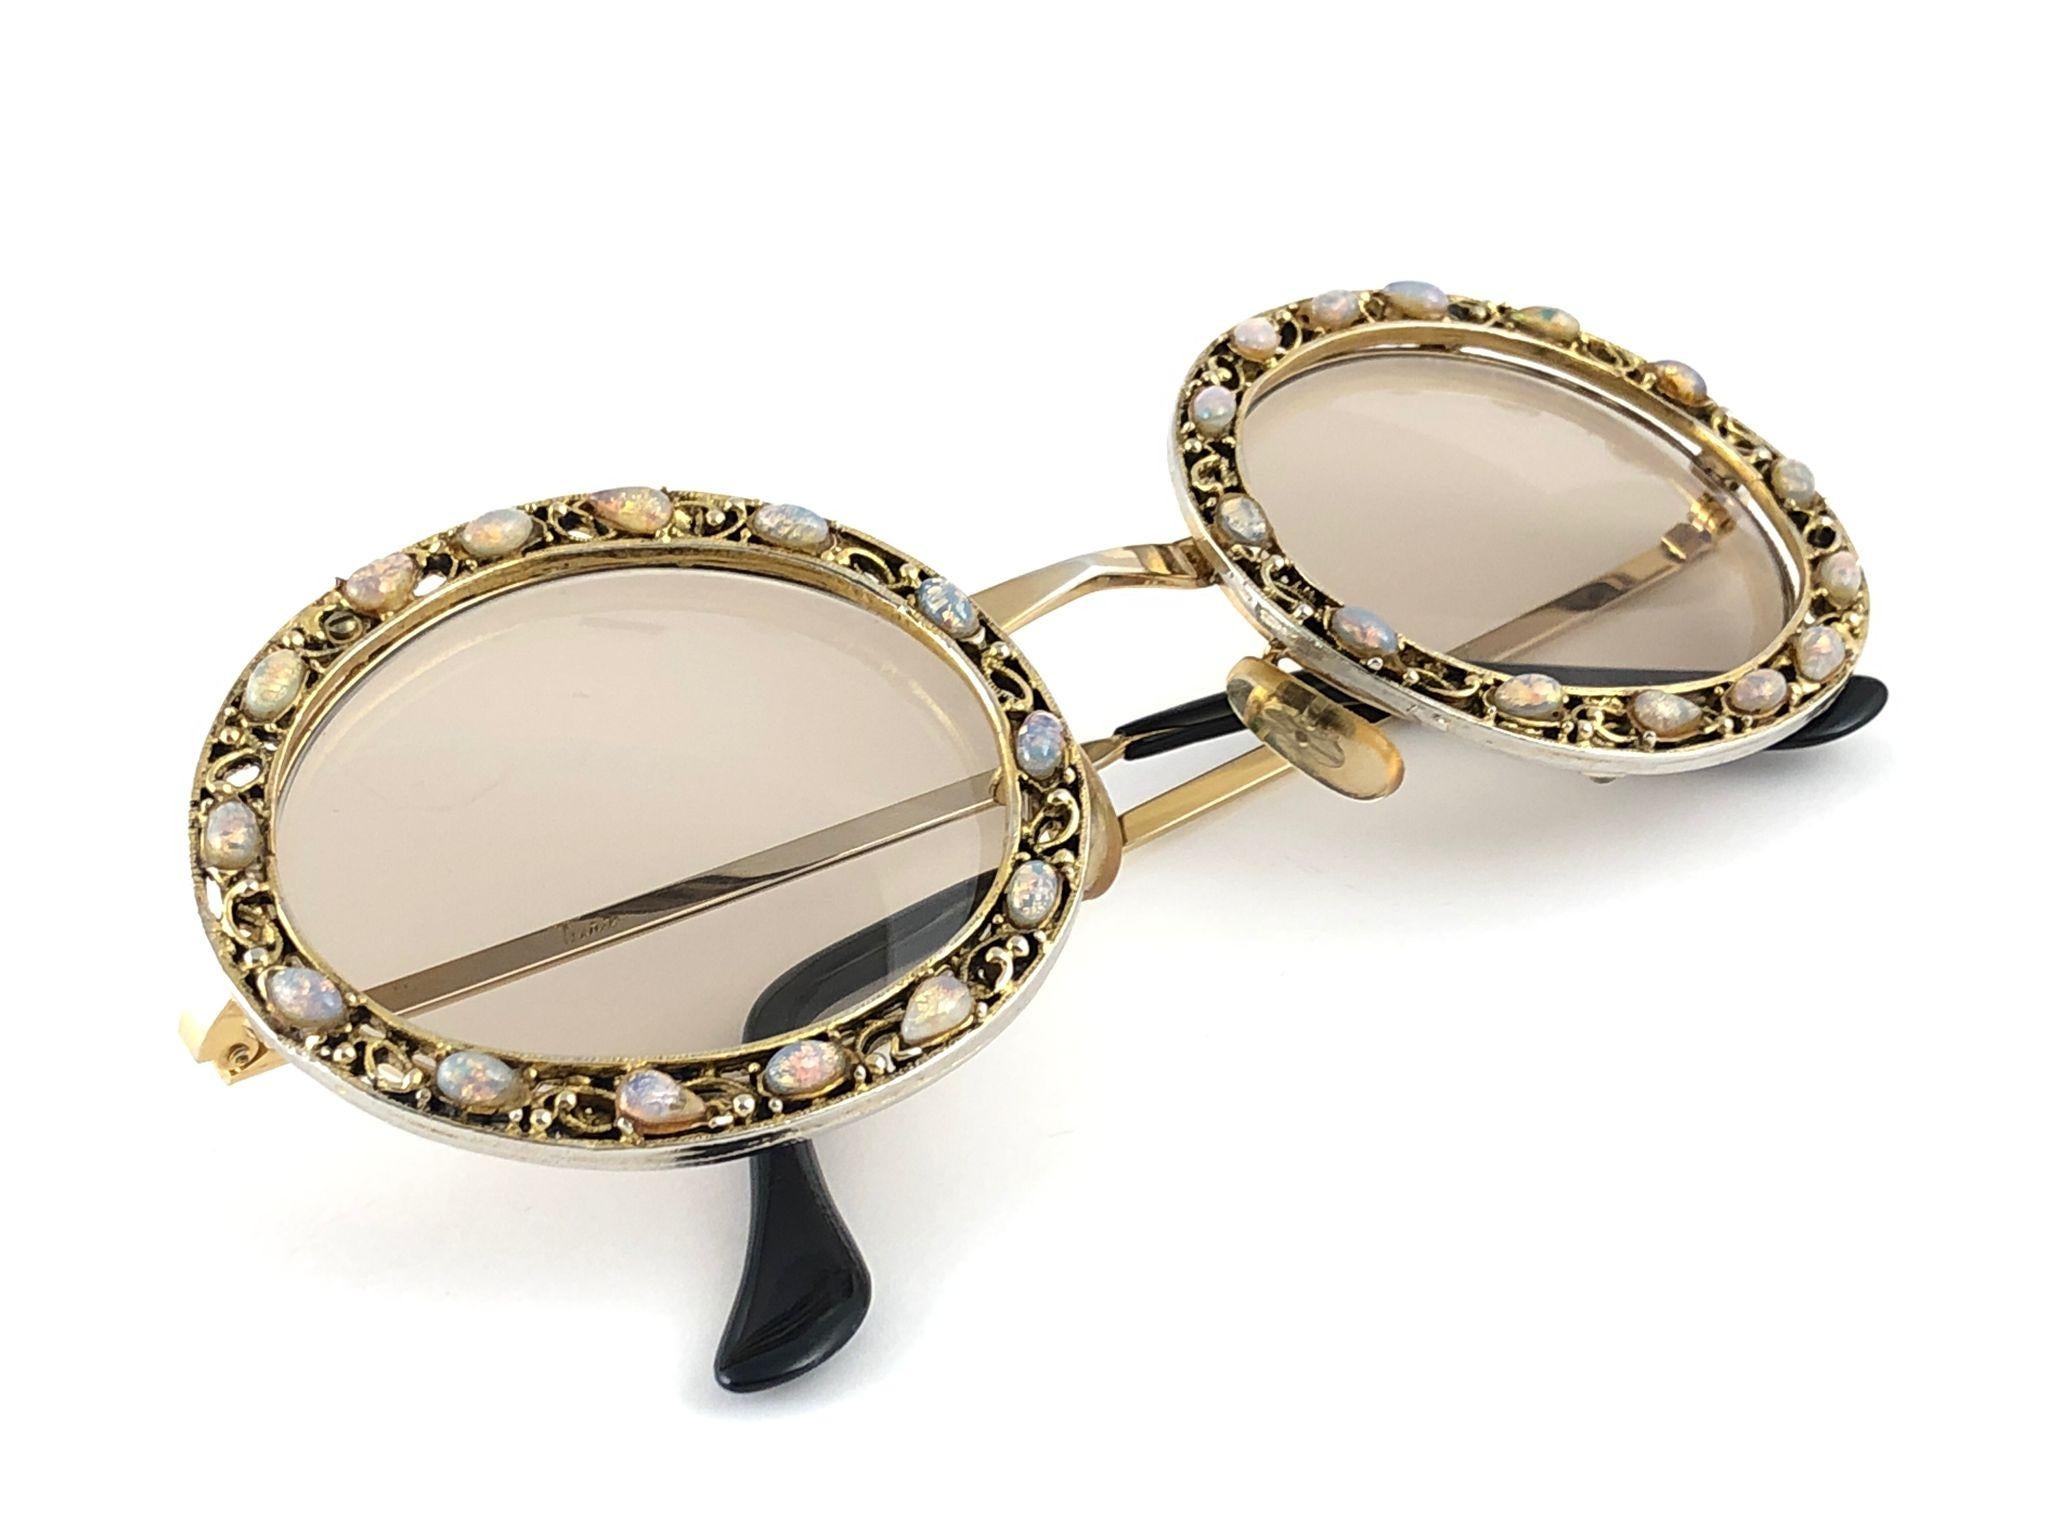 Ultra Rare 1960 Tura Jewelled Opal Accented Frame Archive Dior Sunglasses For Sale 5